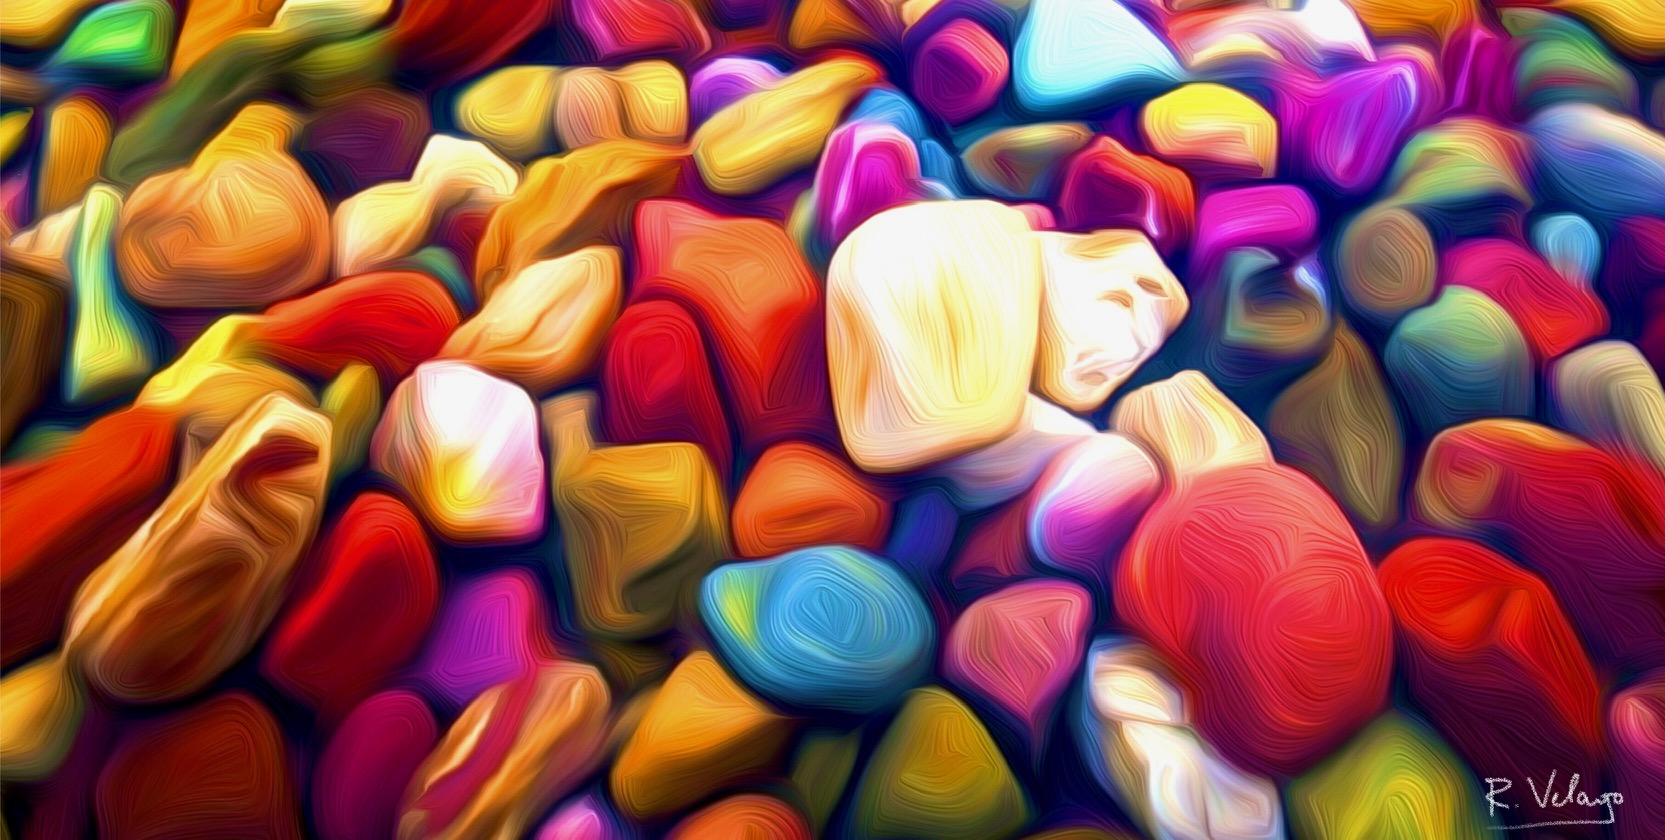 "STONES IN A MYRIAD OF COLORS 2" [Created: 4/03/2021]